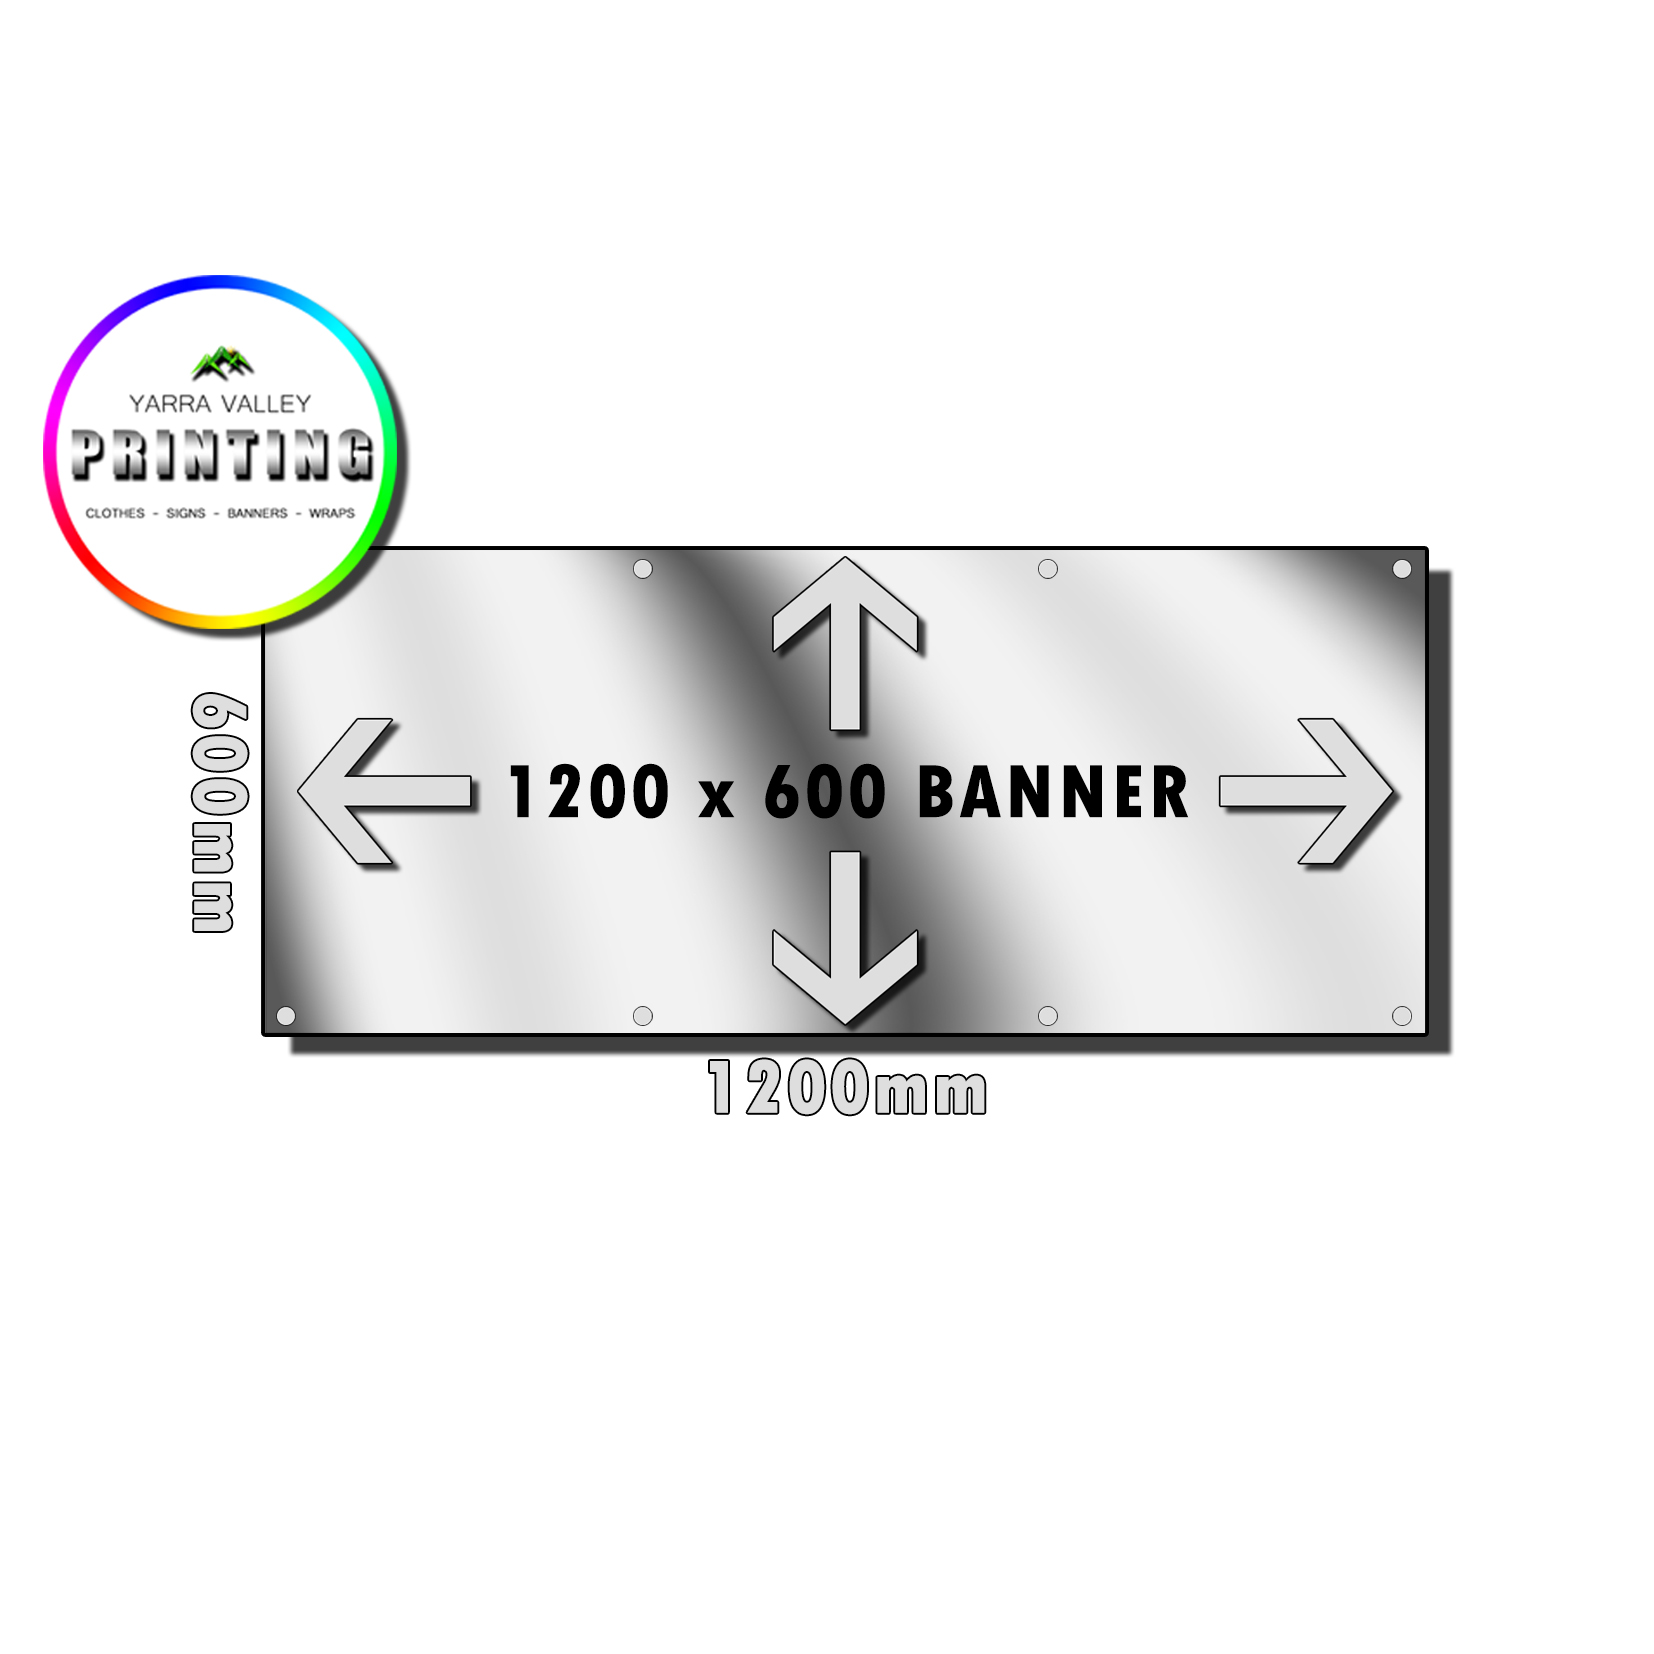 custom-banners-archives-yarra-valley-printing